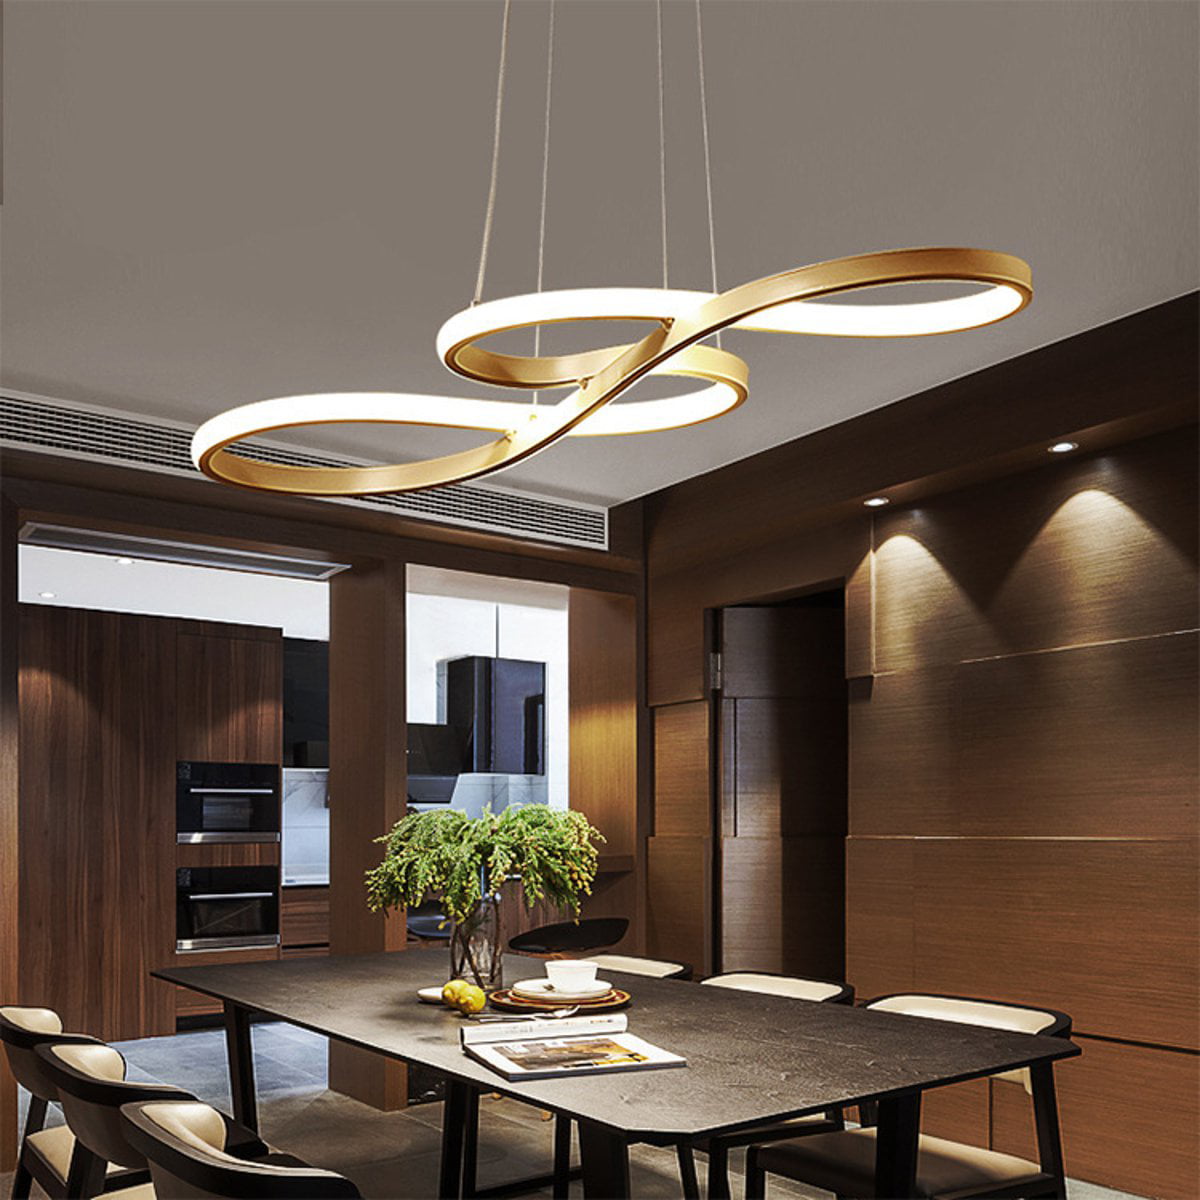 Modern Lighting Solutions For Every Room